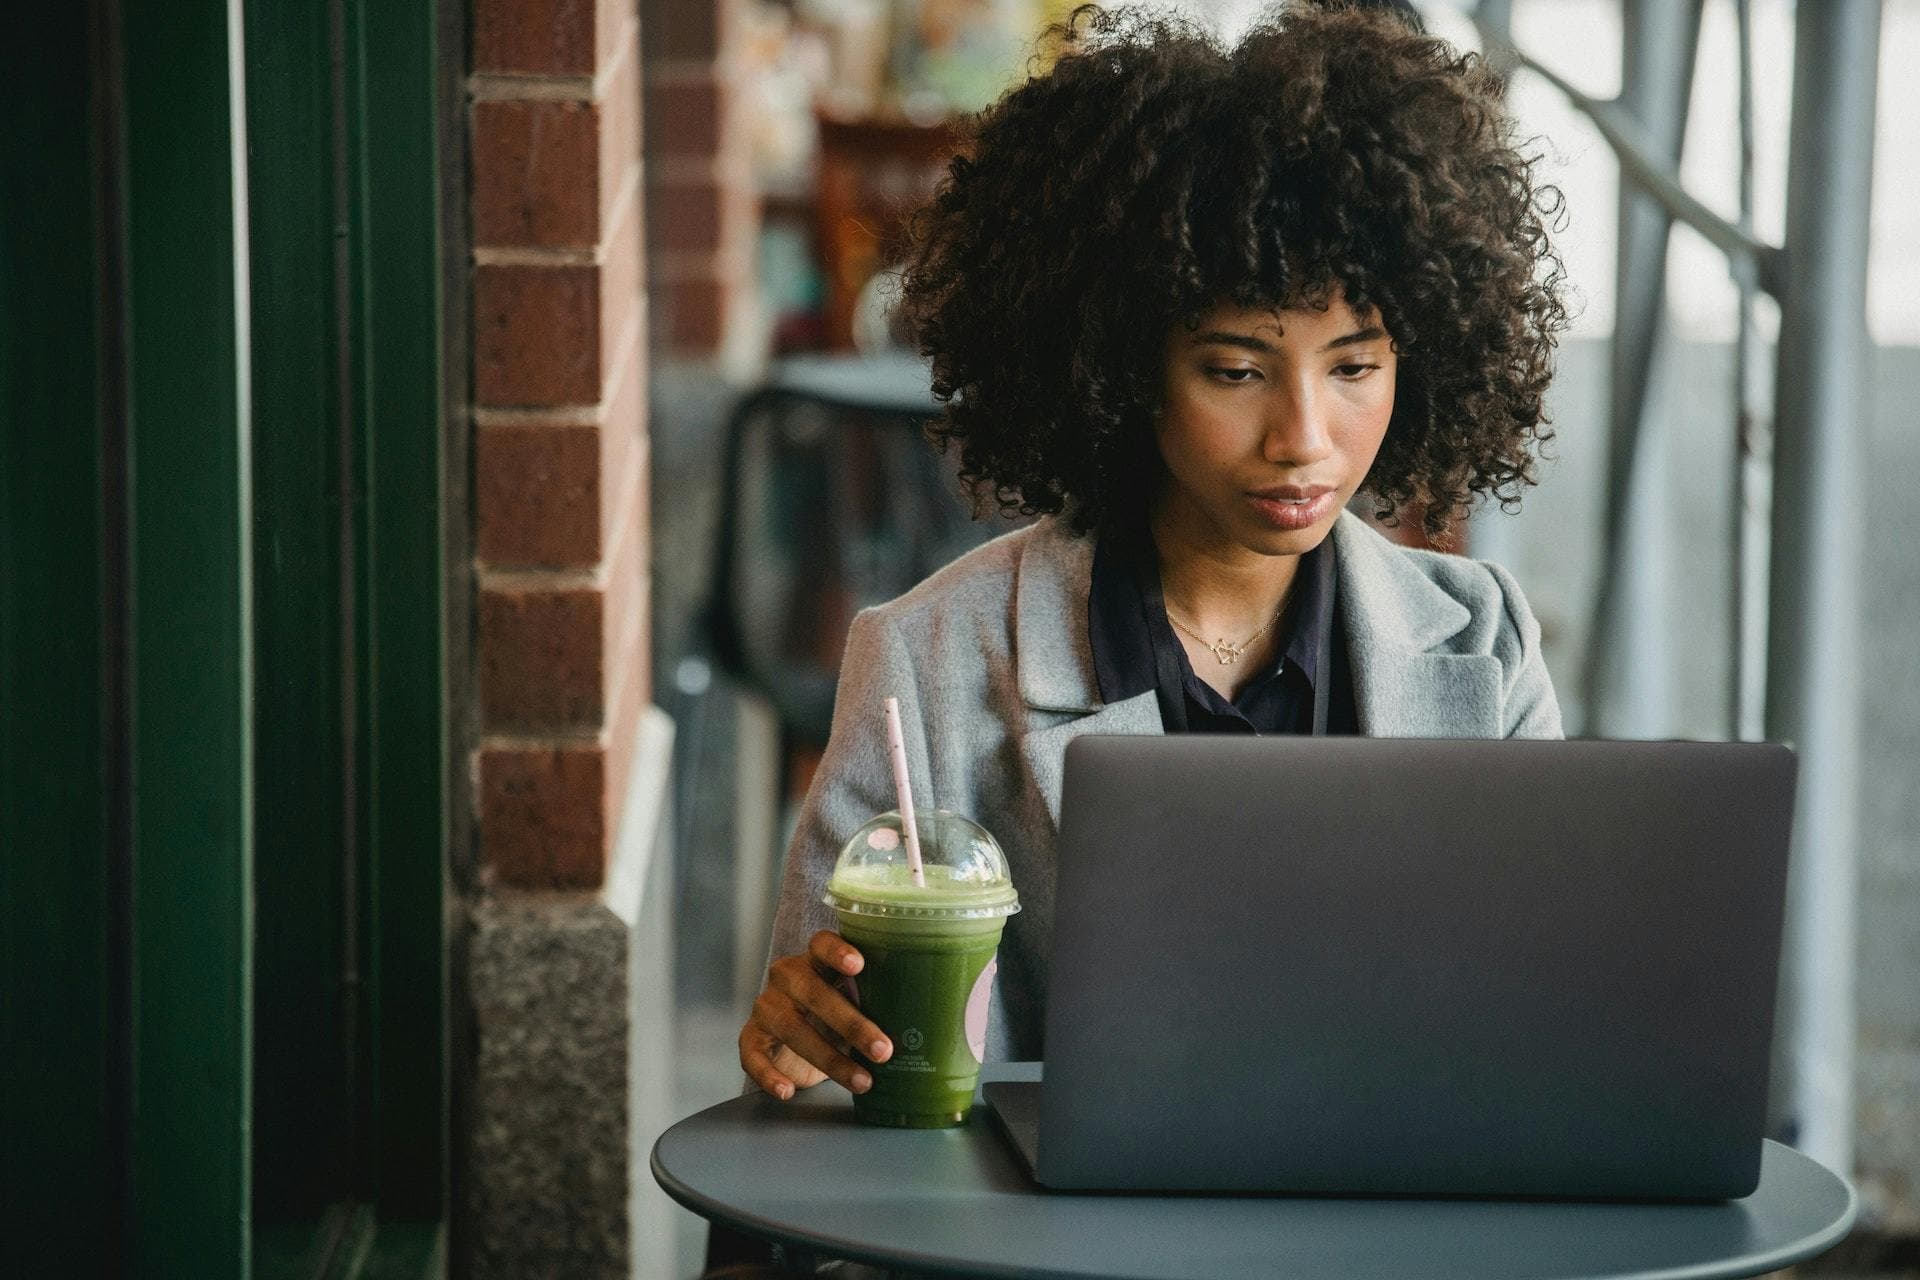 Businesswoman sat at laptop with green smoothie in hand